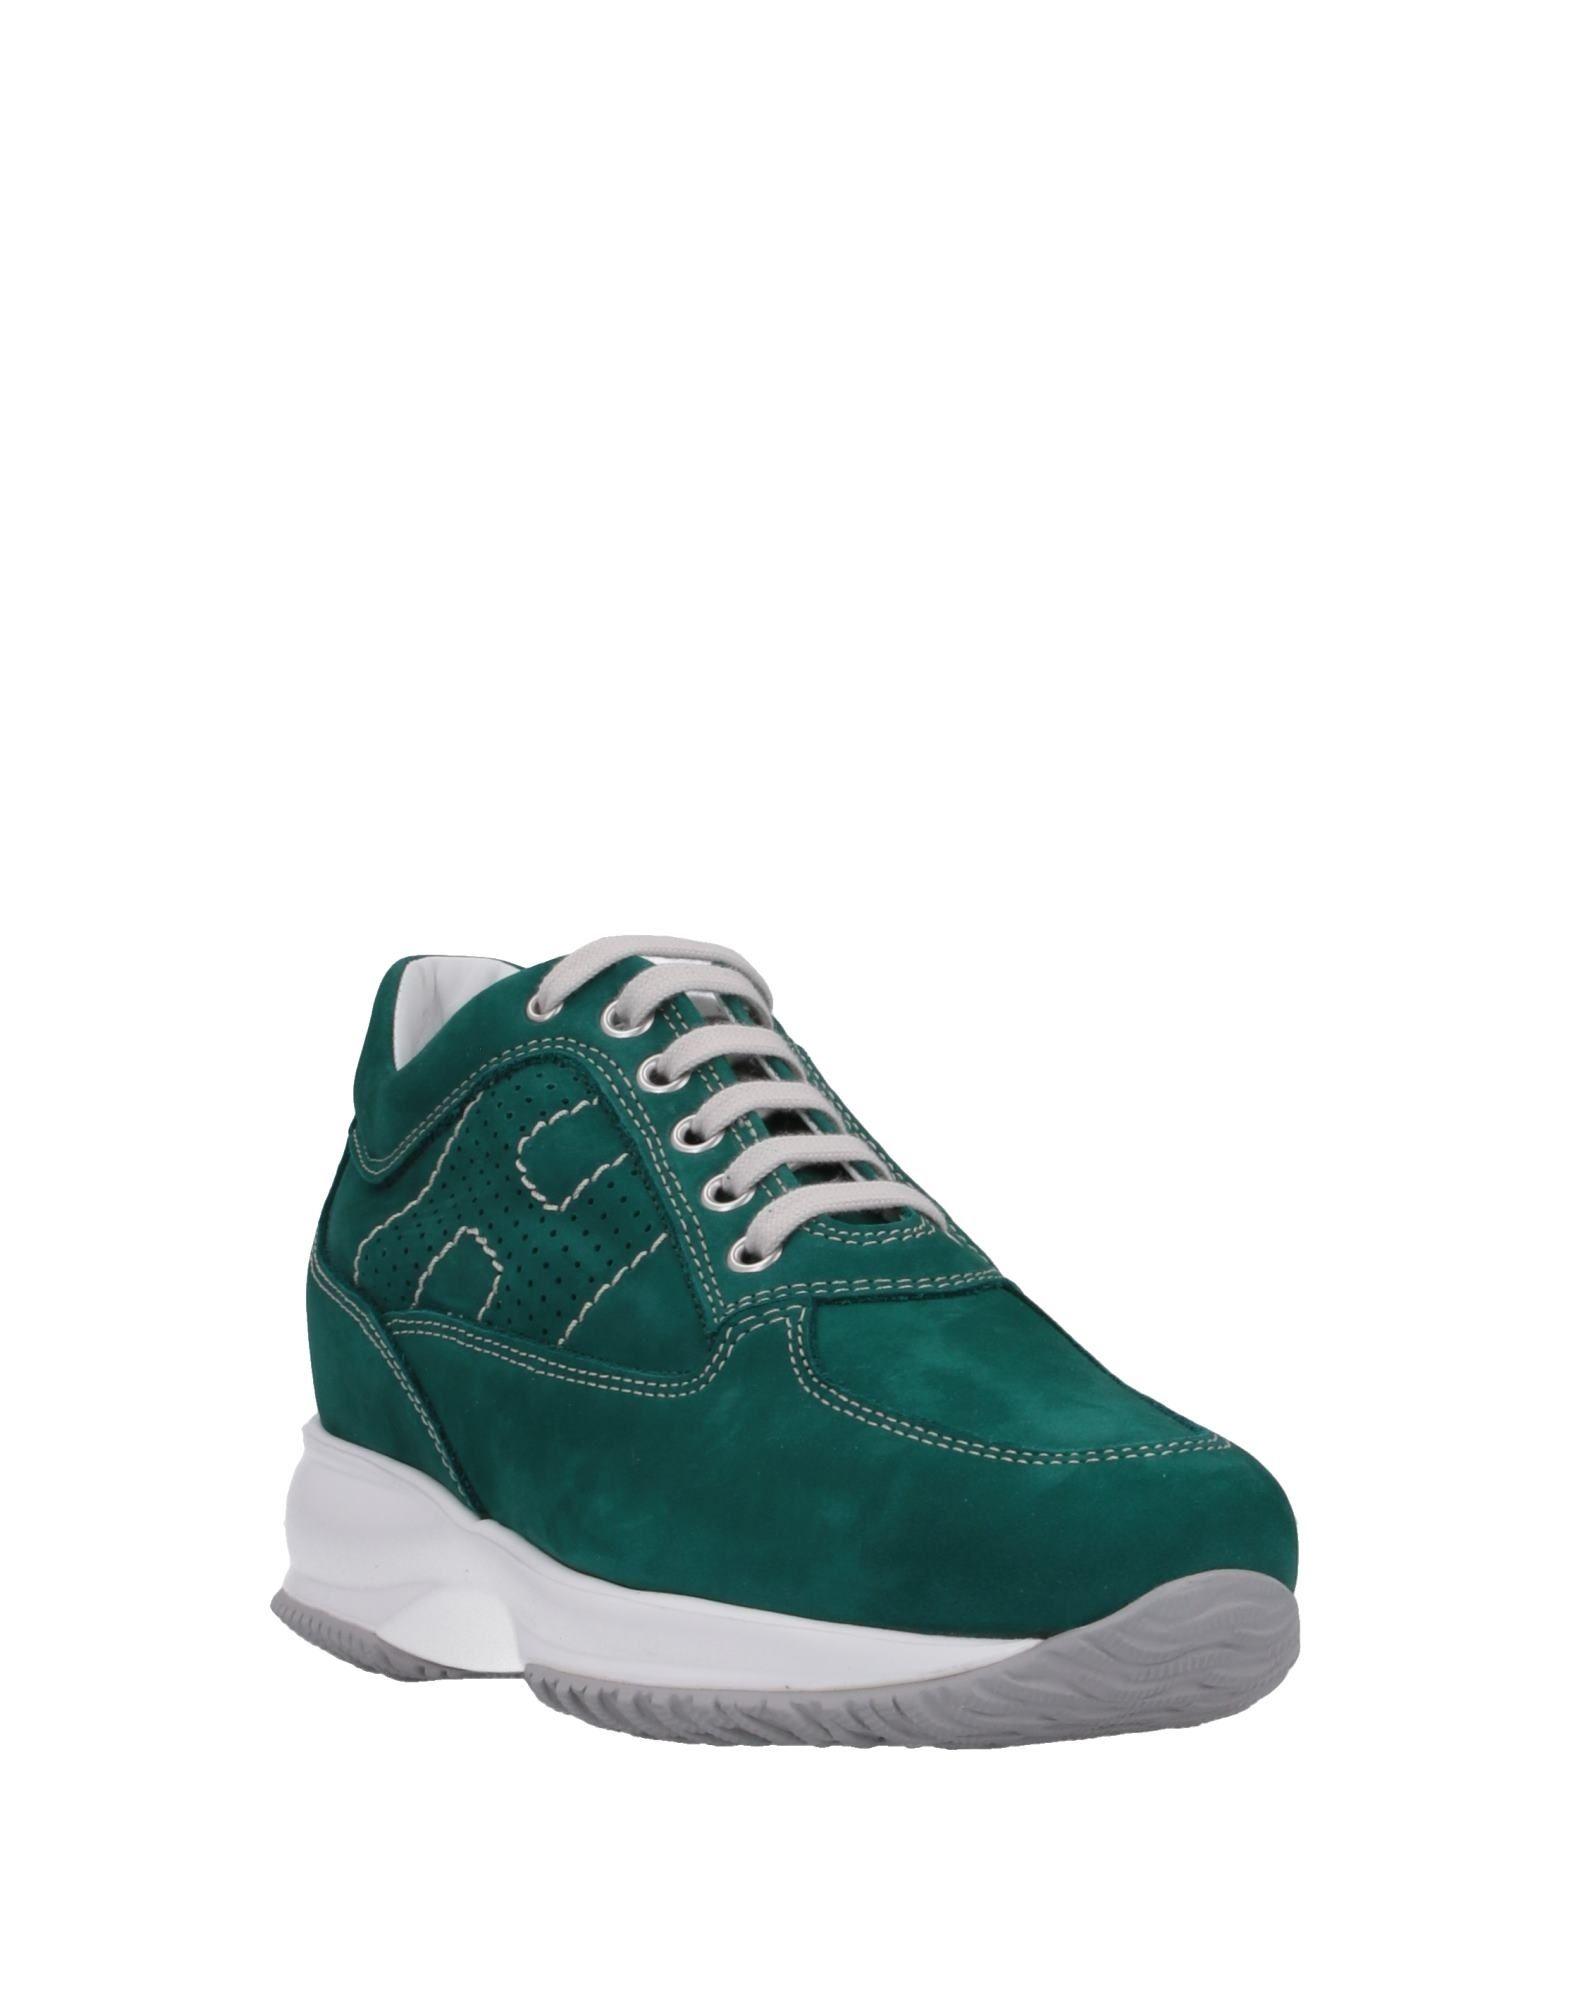 Hogan Leather Low-tops & Sneakers in Emerald Green (Green) - Lyst